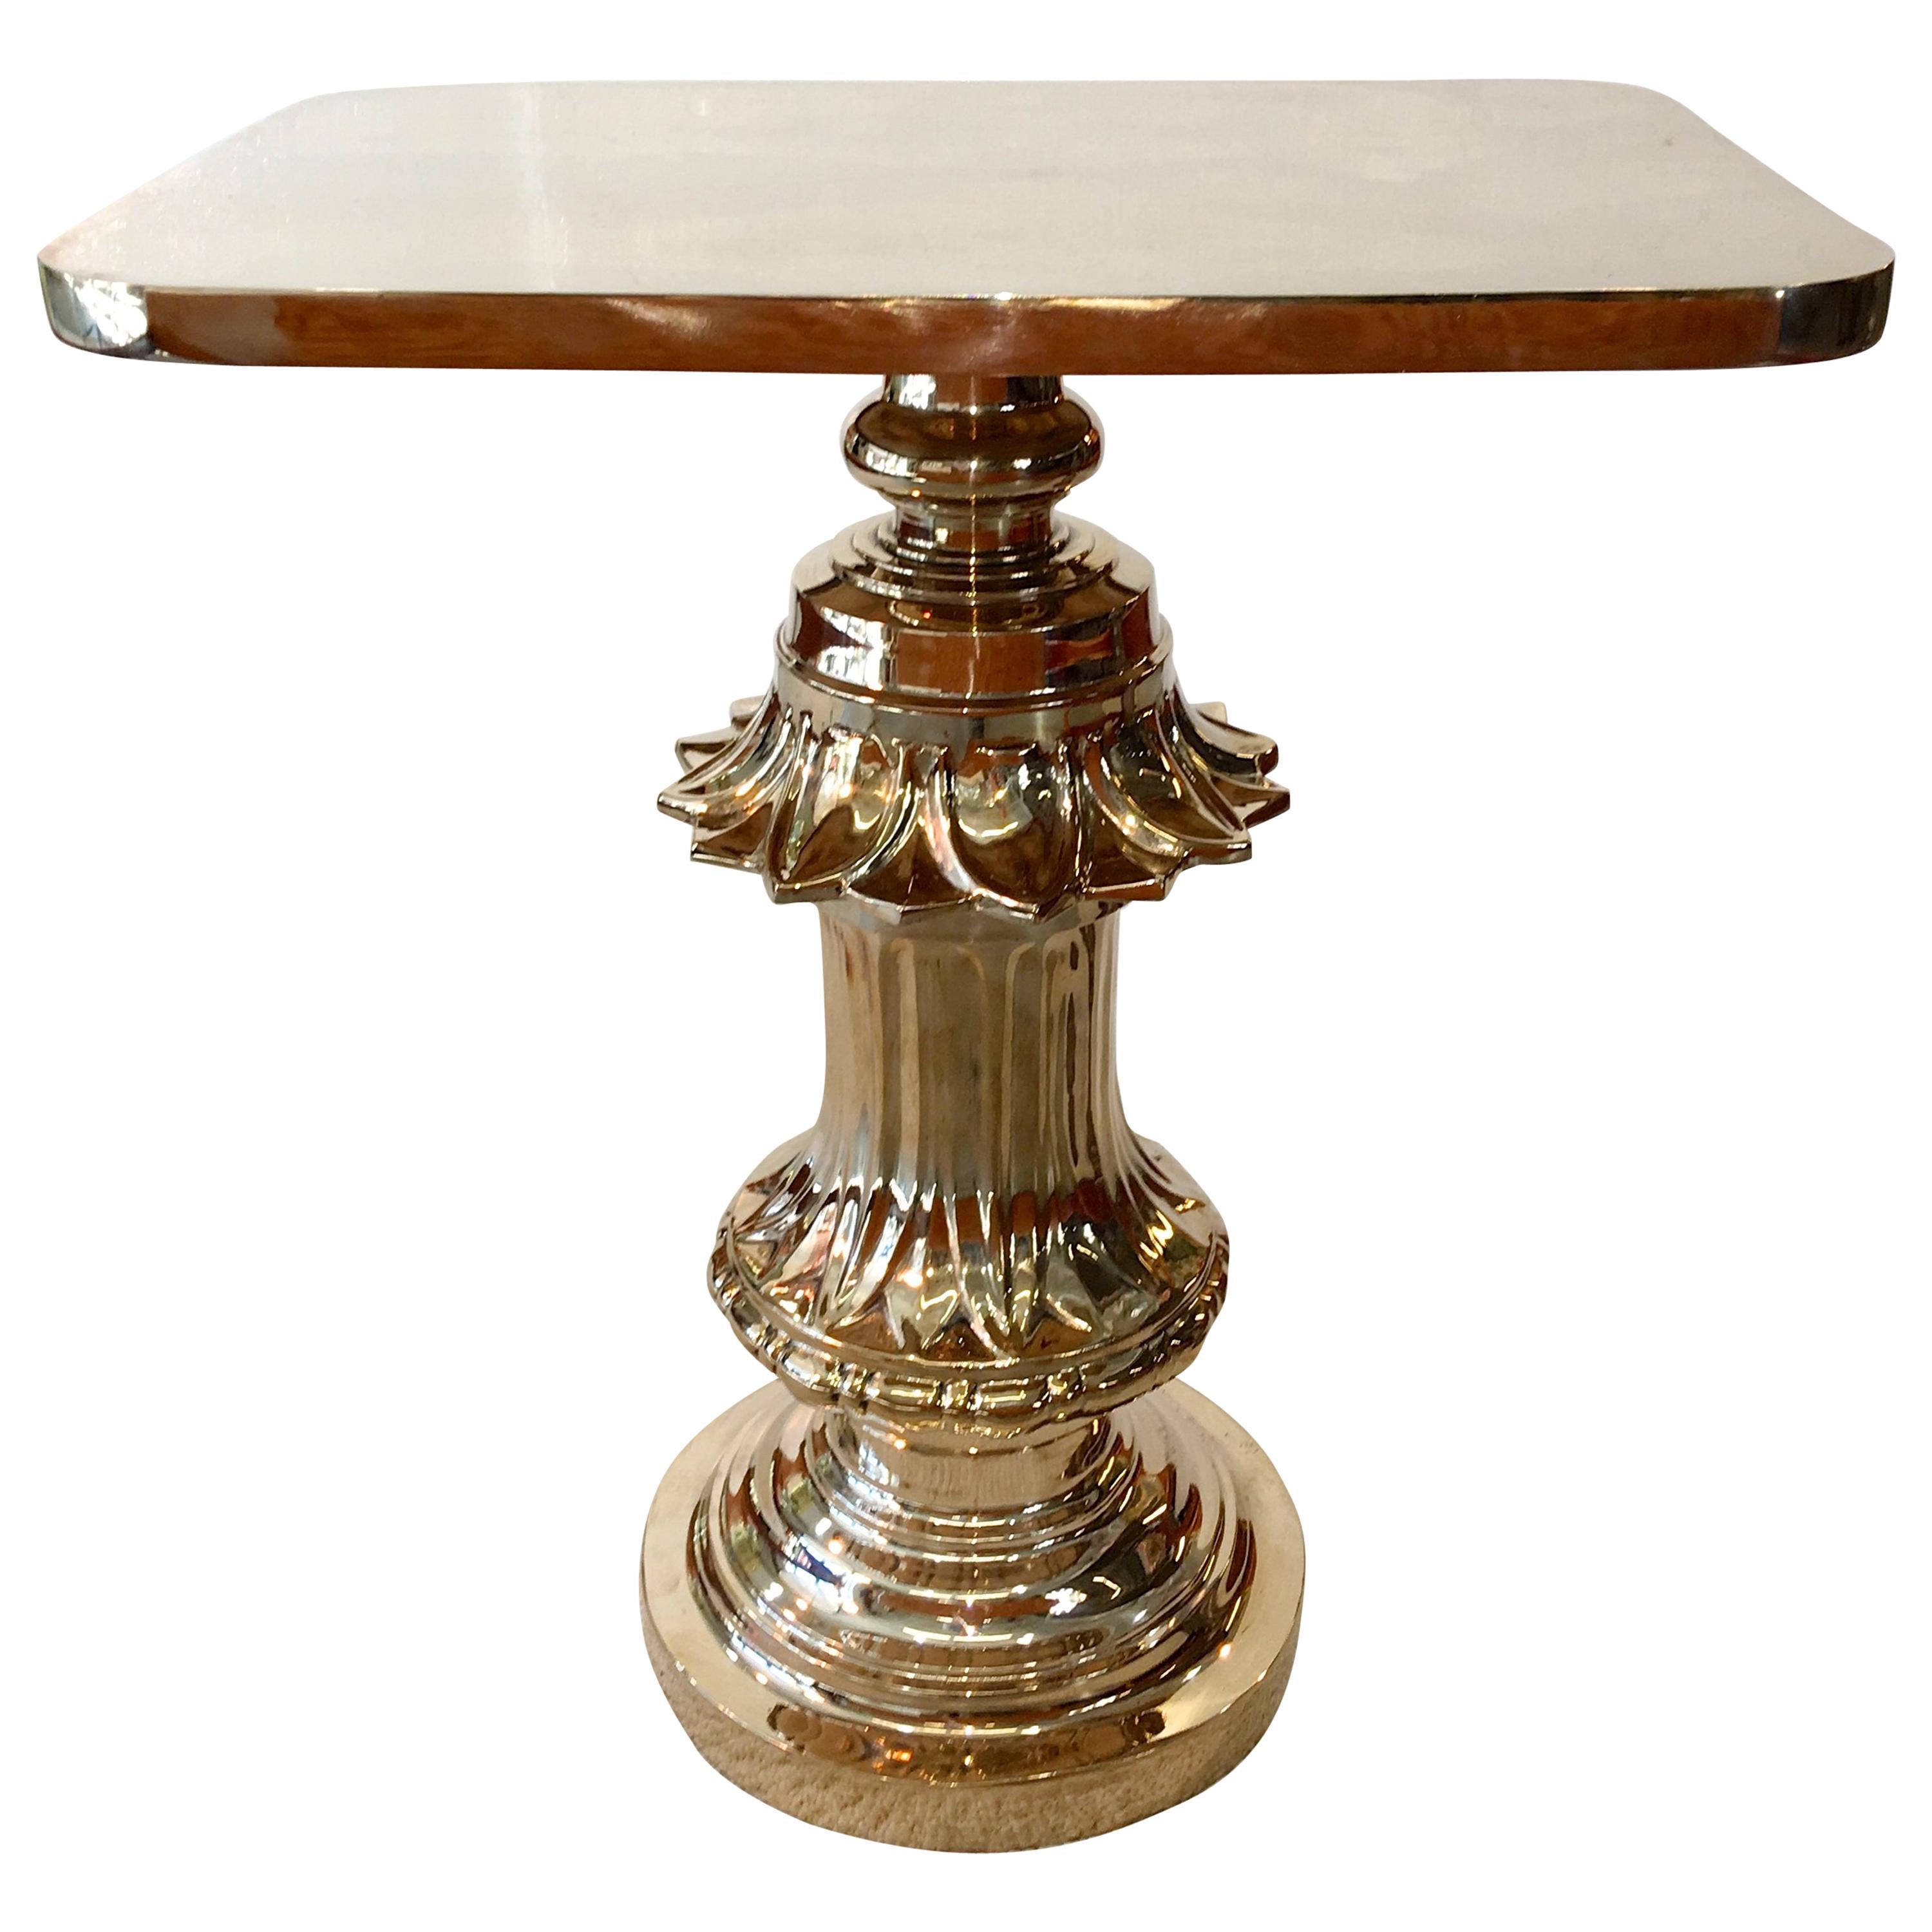 Old Boston Street Lamp Post Table in Solid Bronze by Zach Gabbard